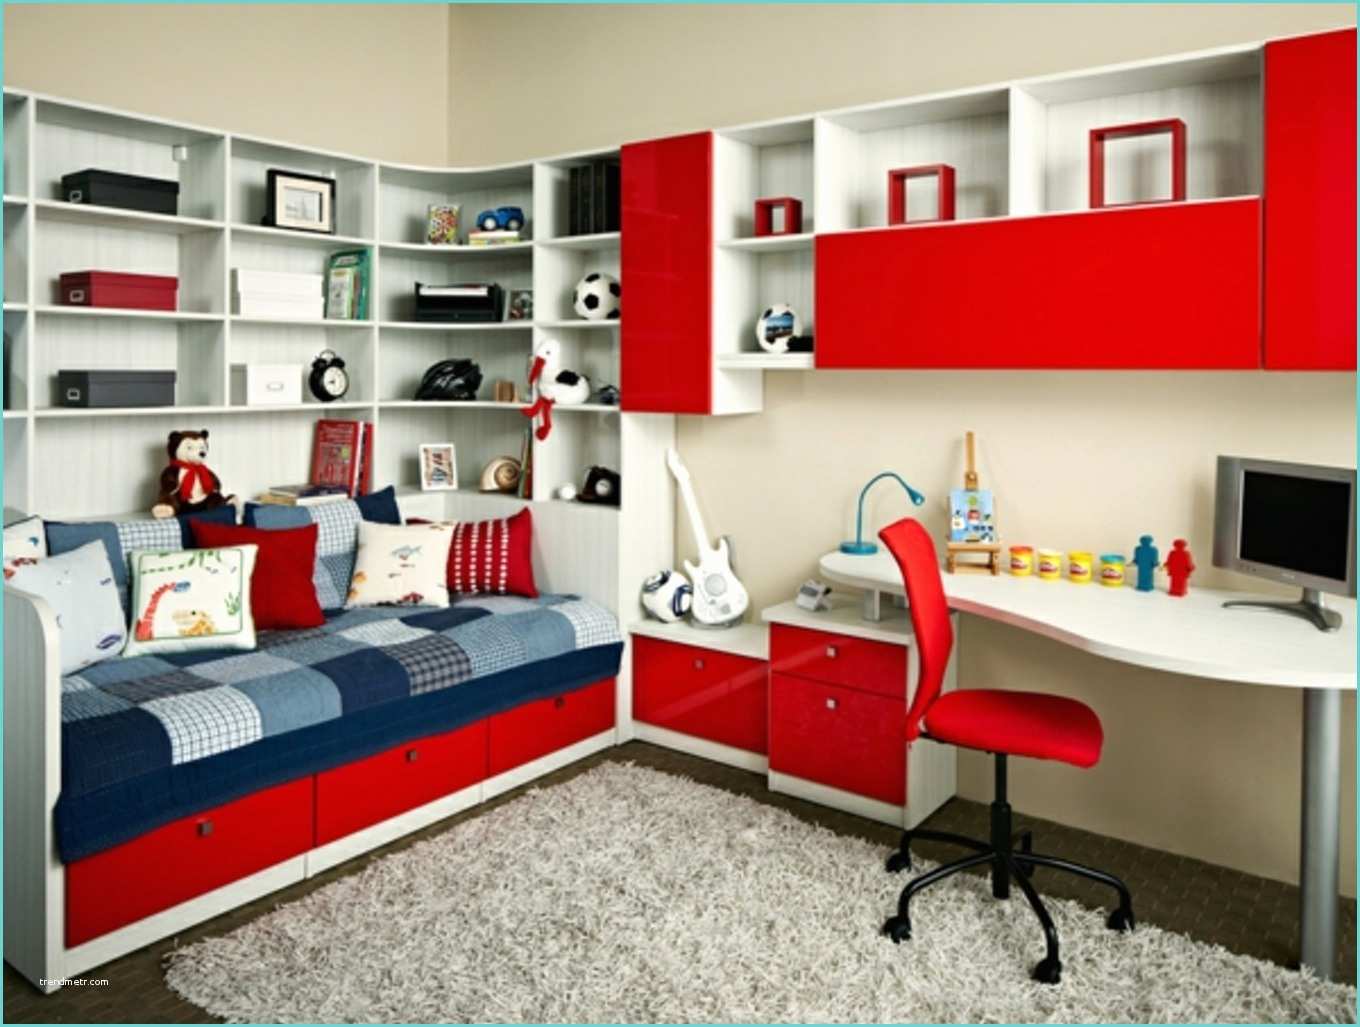 Chambre Ado Fille Petit Espace Awesome Idee Deco Chambre Ado Petit Espace Ideas Matkin